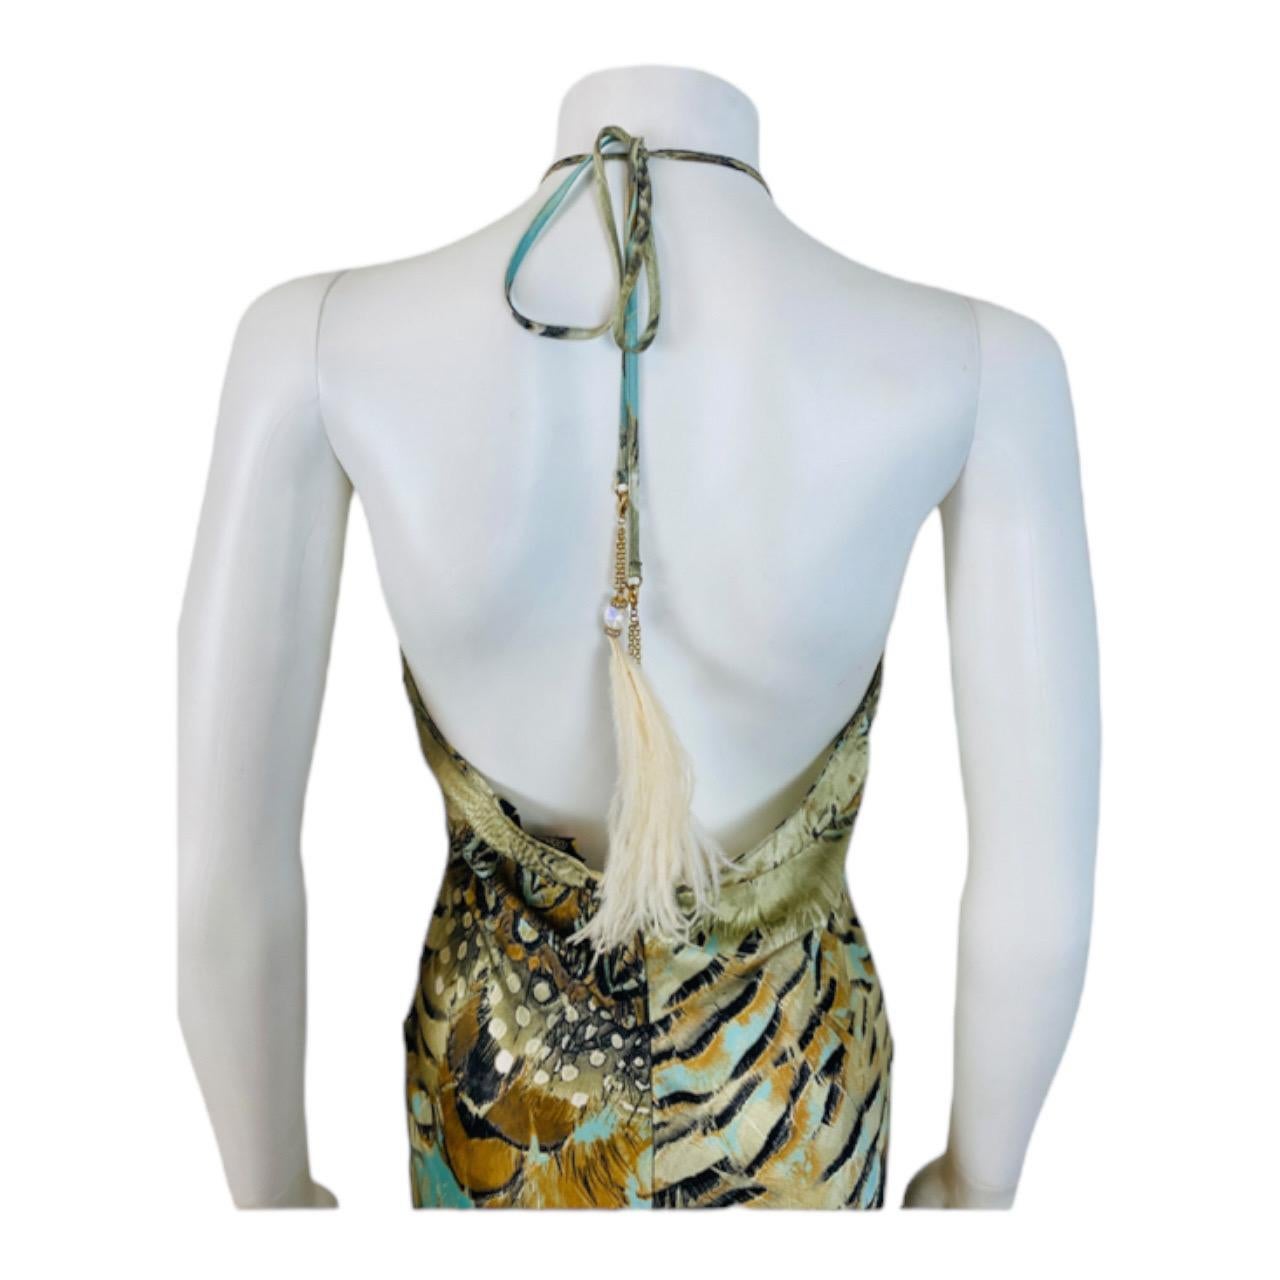 Vintage S/S 2004 Y2K Roberto Cavalli Silk Feather Print Halter Dress Gown Ruffle For Sale 3